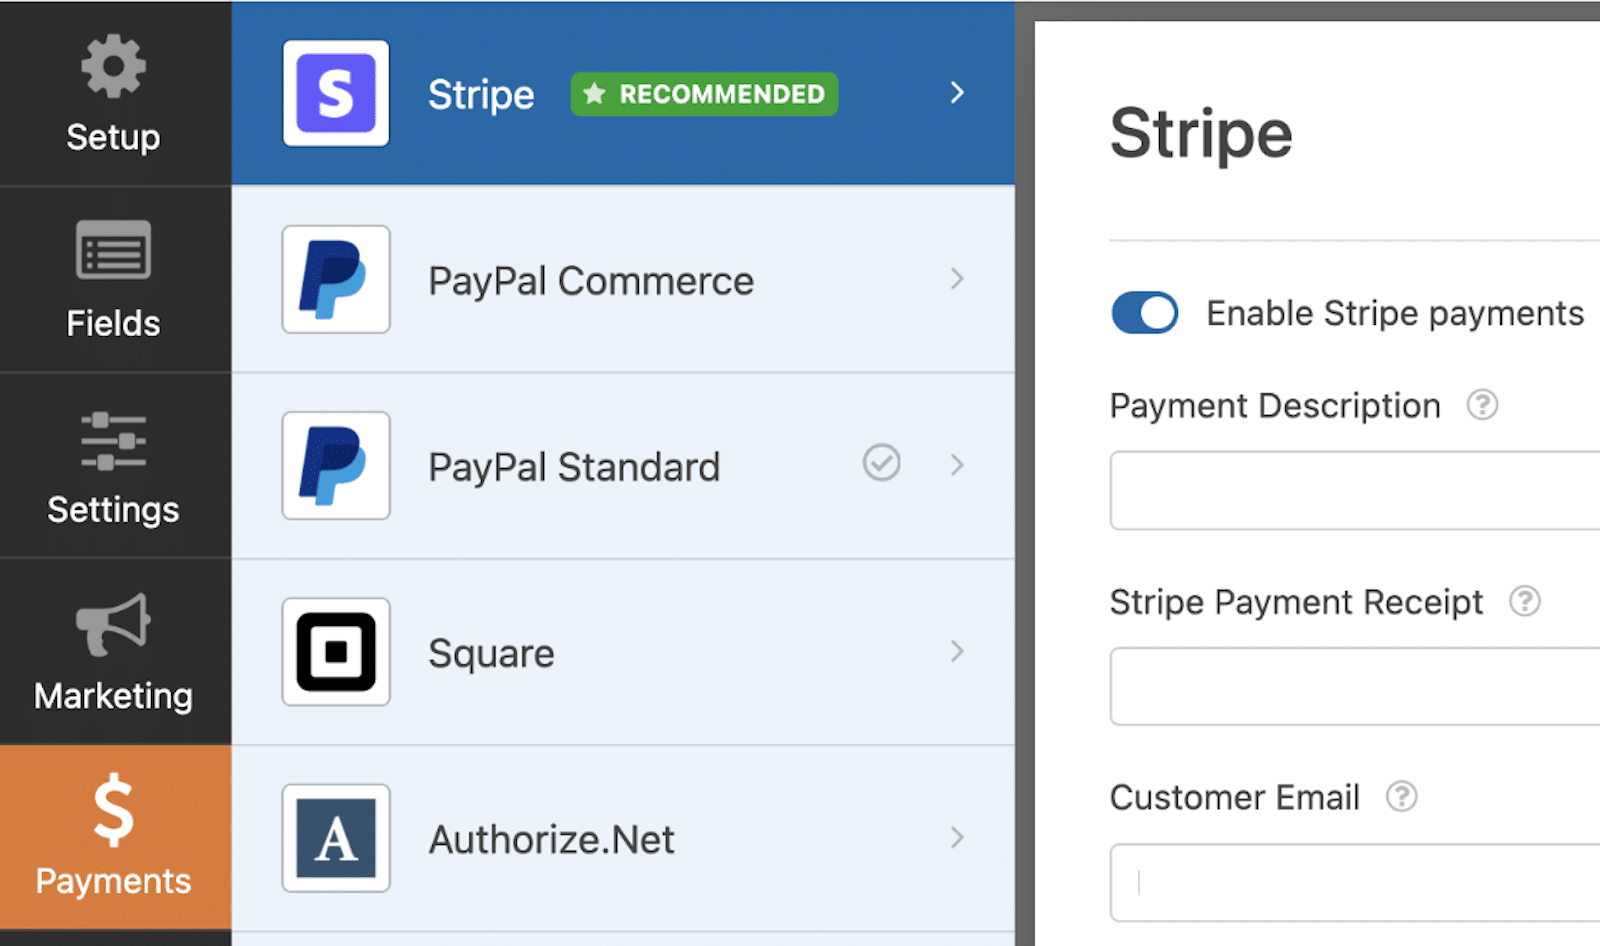 Enabling Stripe payments on the order form 